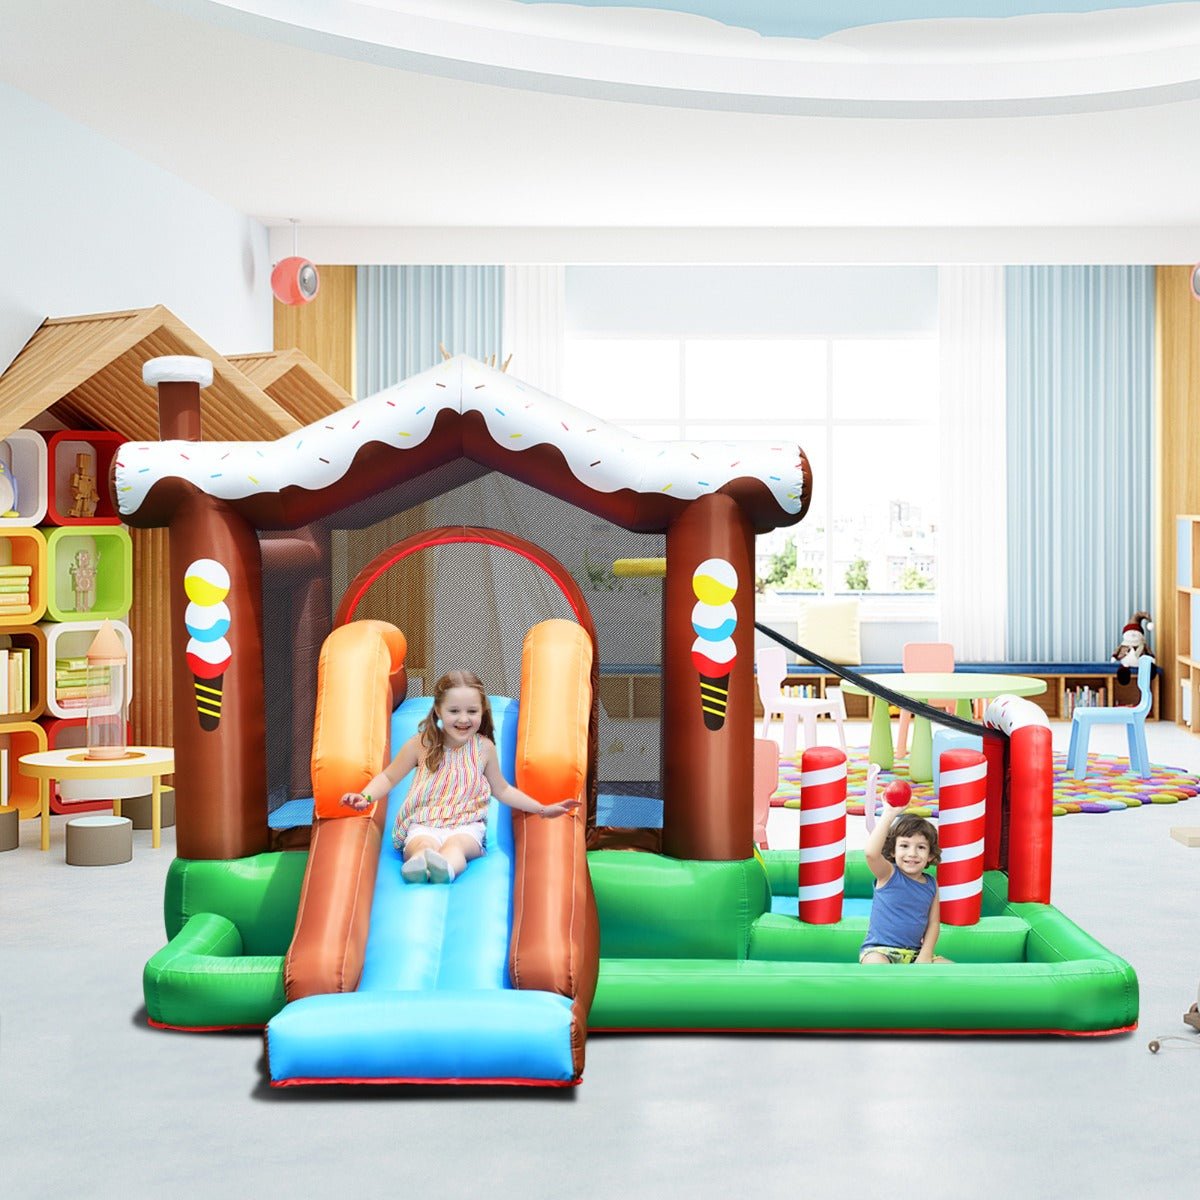 Inflatable Bounce Castle with Slide - Indoor/Outdoor Play (Blower Included)